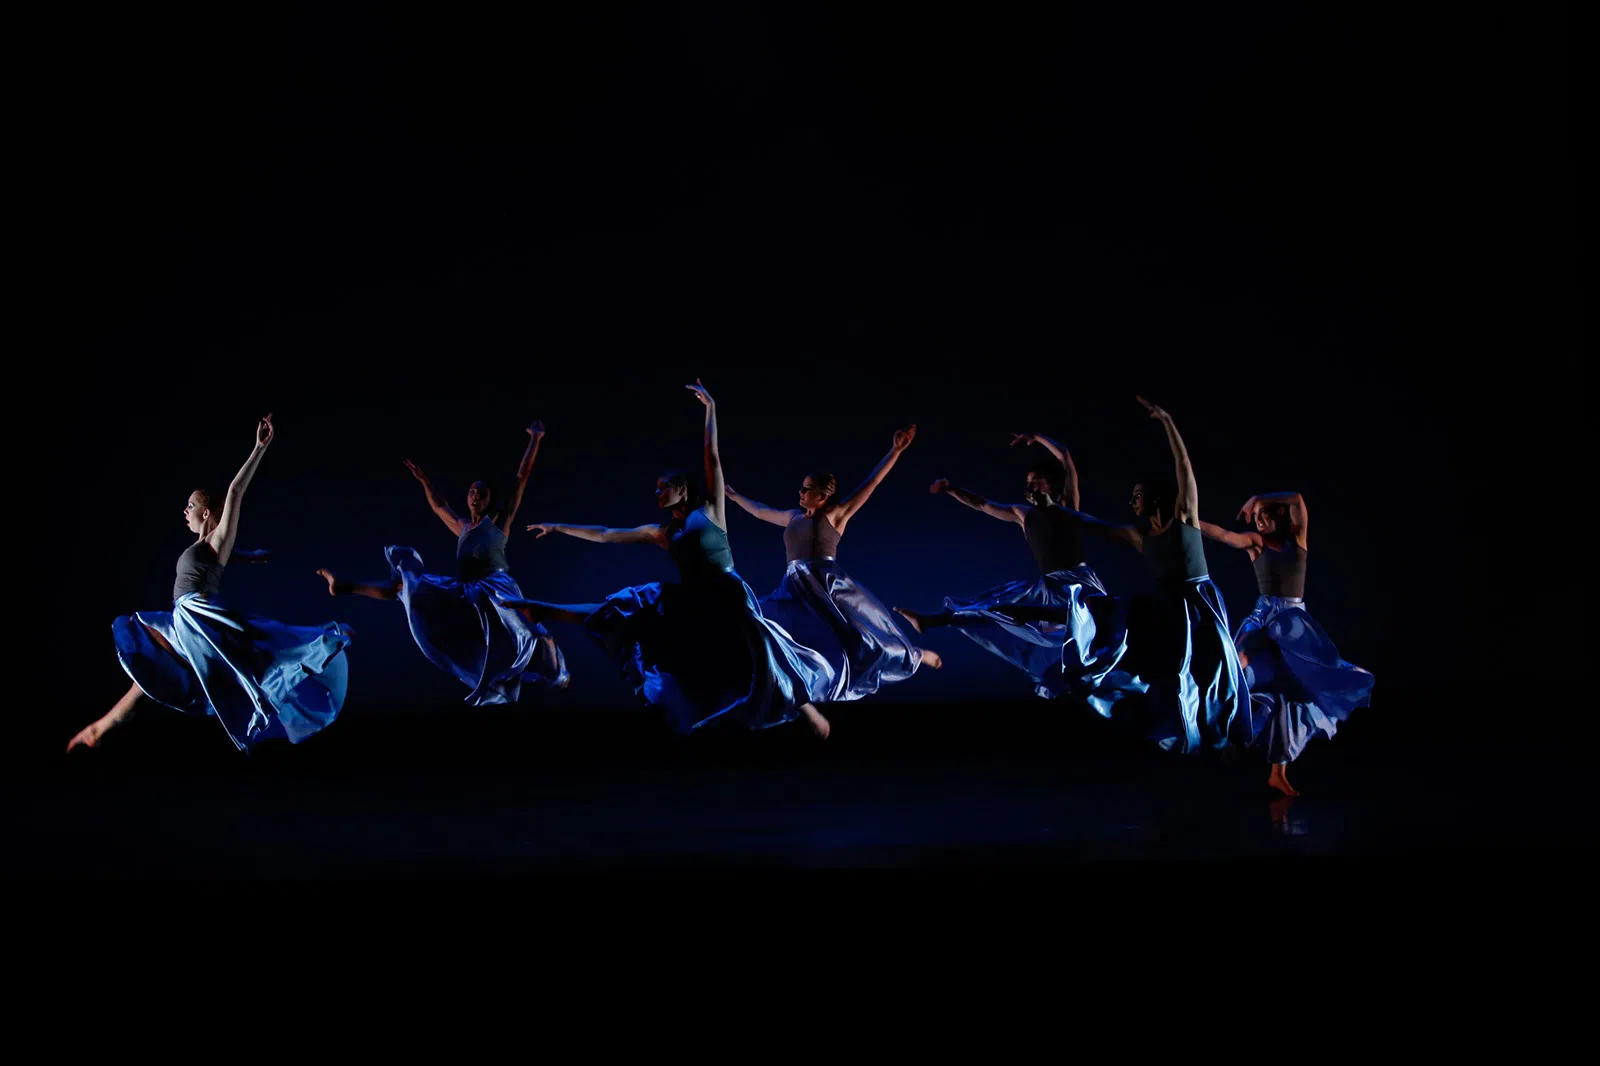 7 dancers are preforming. They are dressed in blue under low lighting.